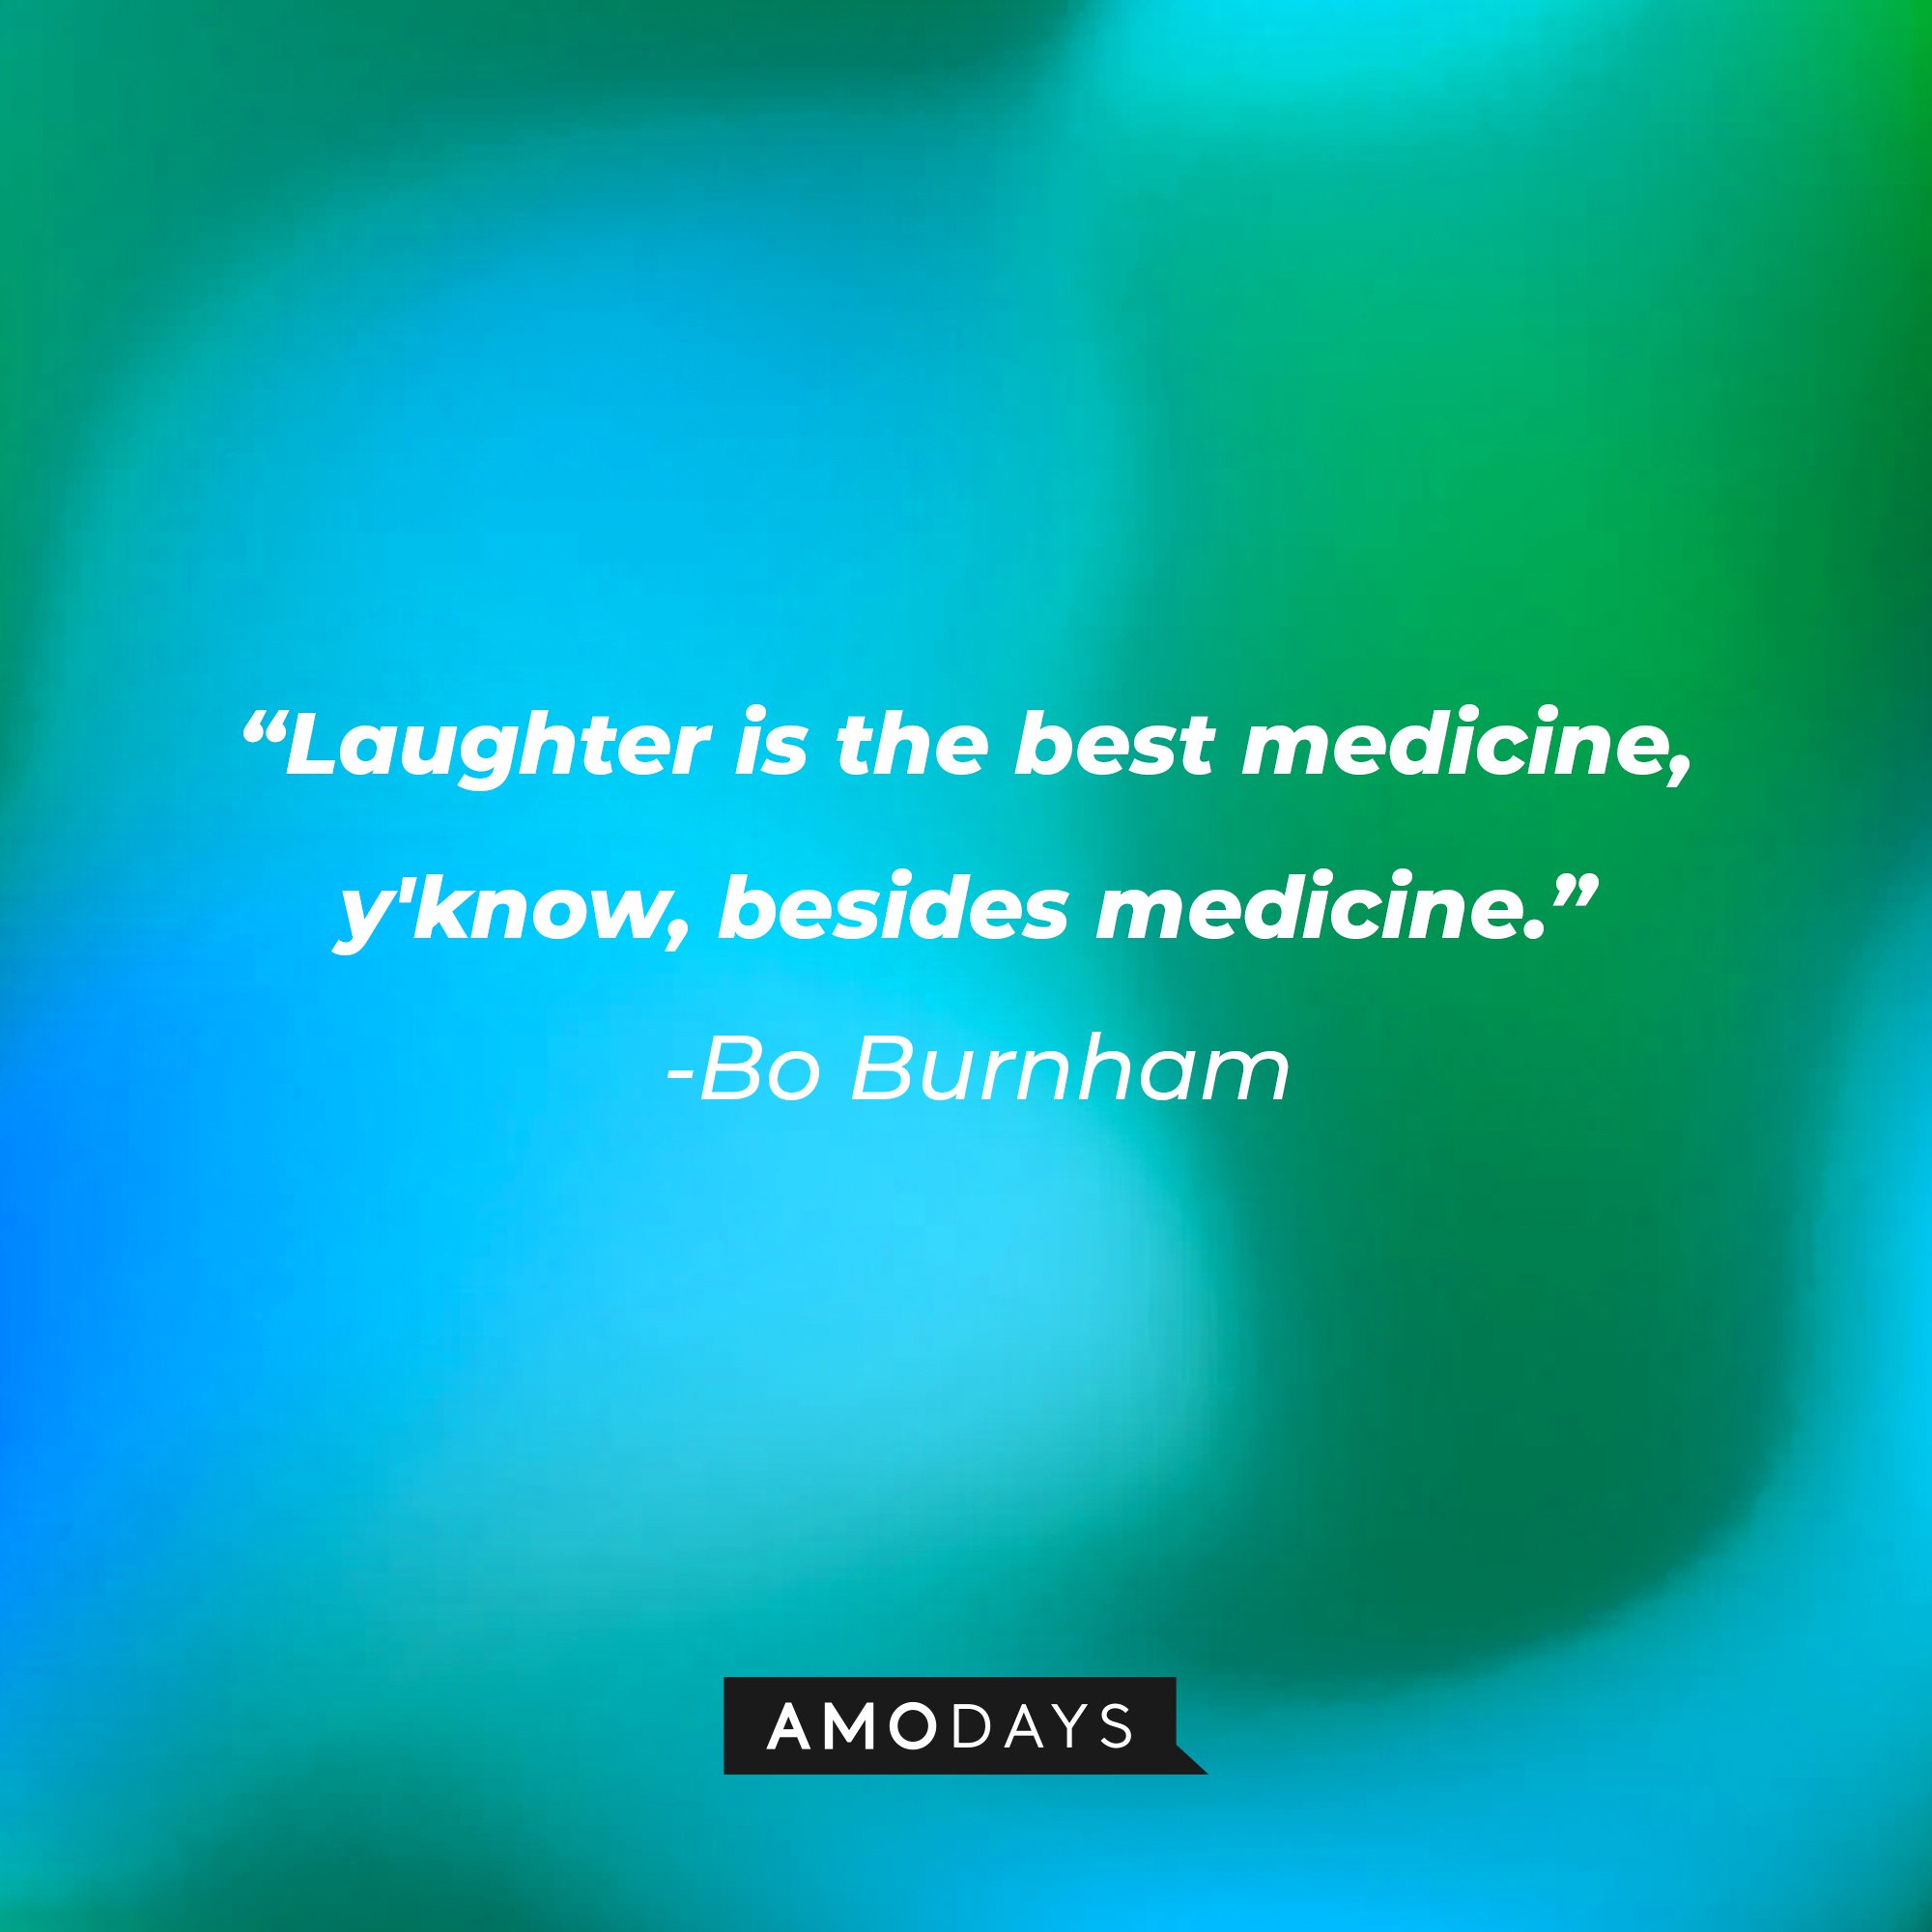 Bo Burnham’s quote: "Laughter is the best medicine, y'know, besides medicine." | Image: AmoDays